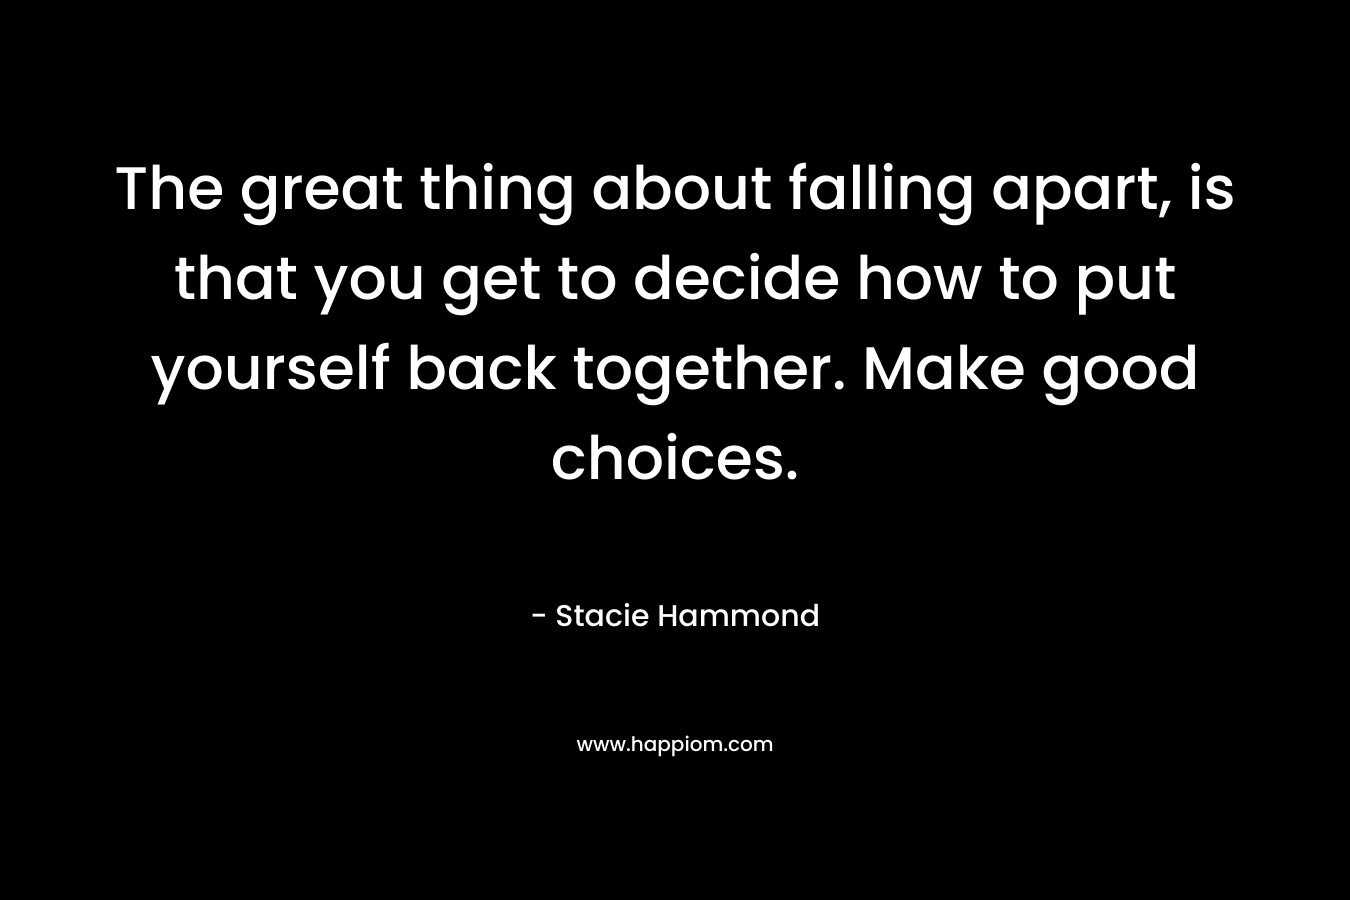 The great thing about falling apart, is that you get to decide how to put yourself back together. Make good choices. – Stacie Hammond